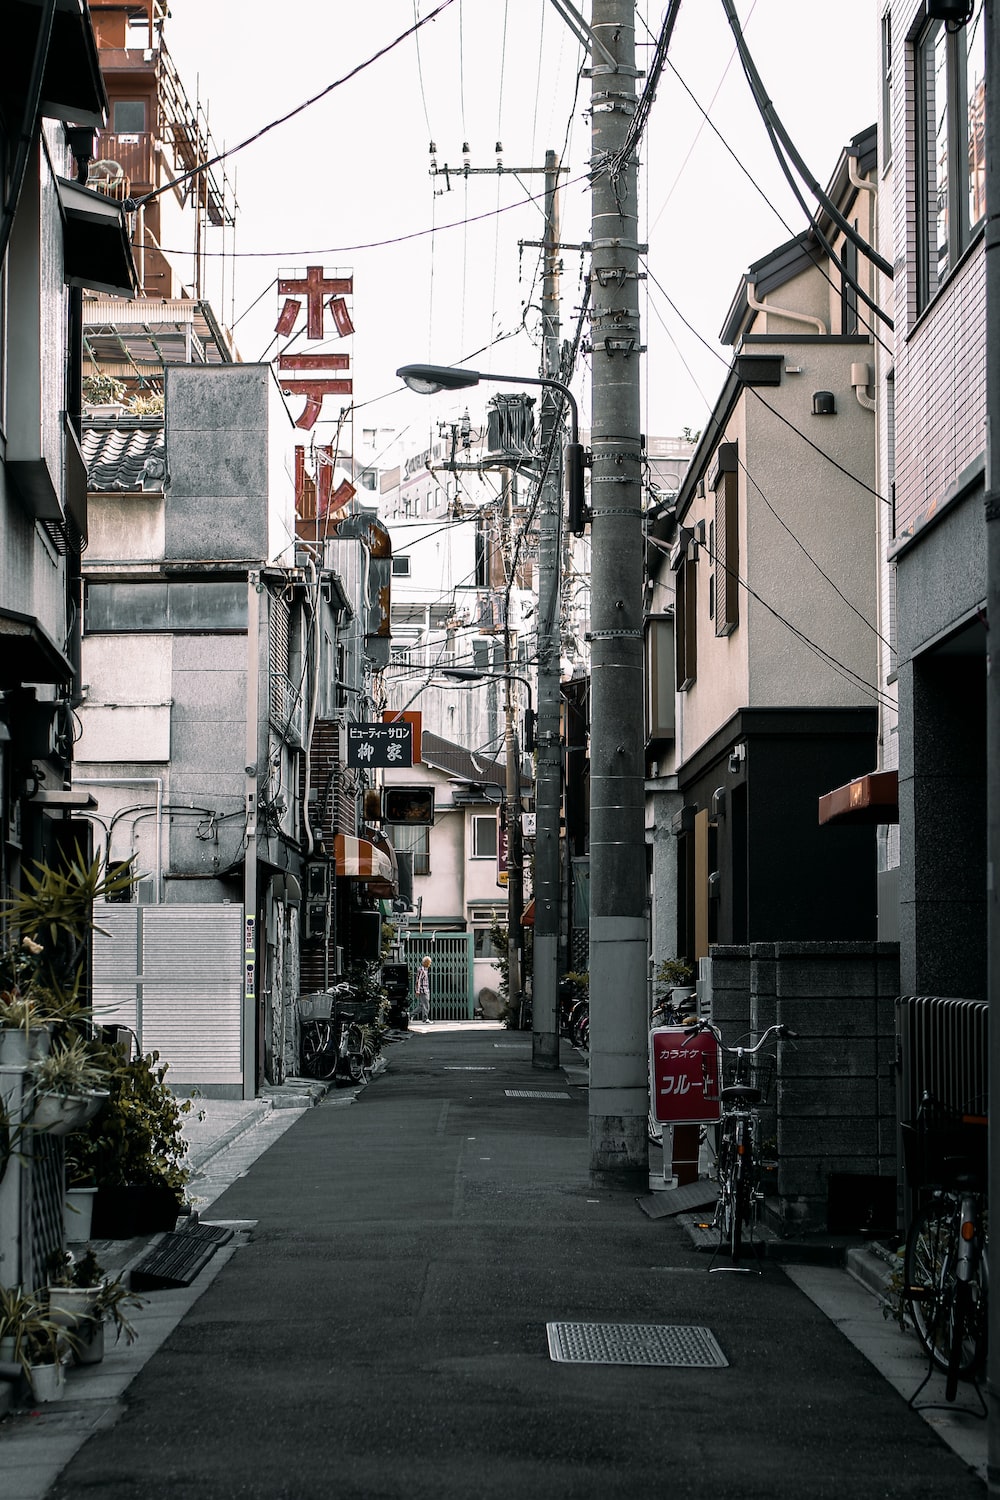 A small street in the city of Kyoto - Japan